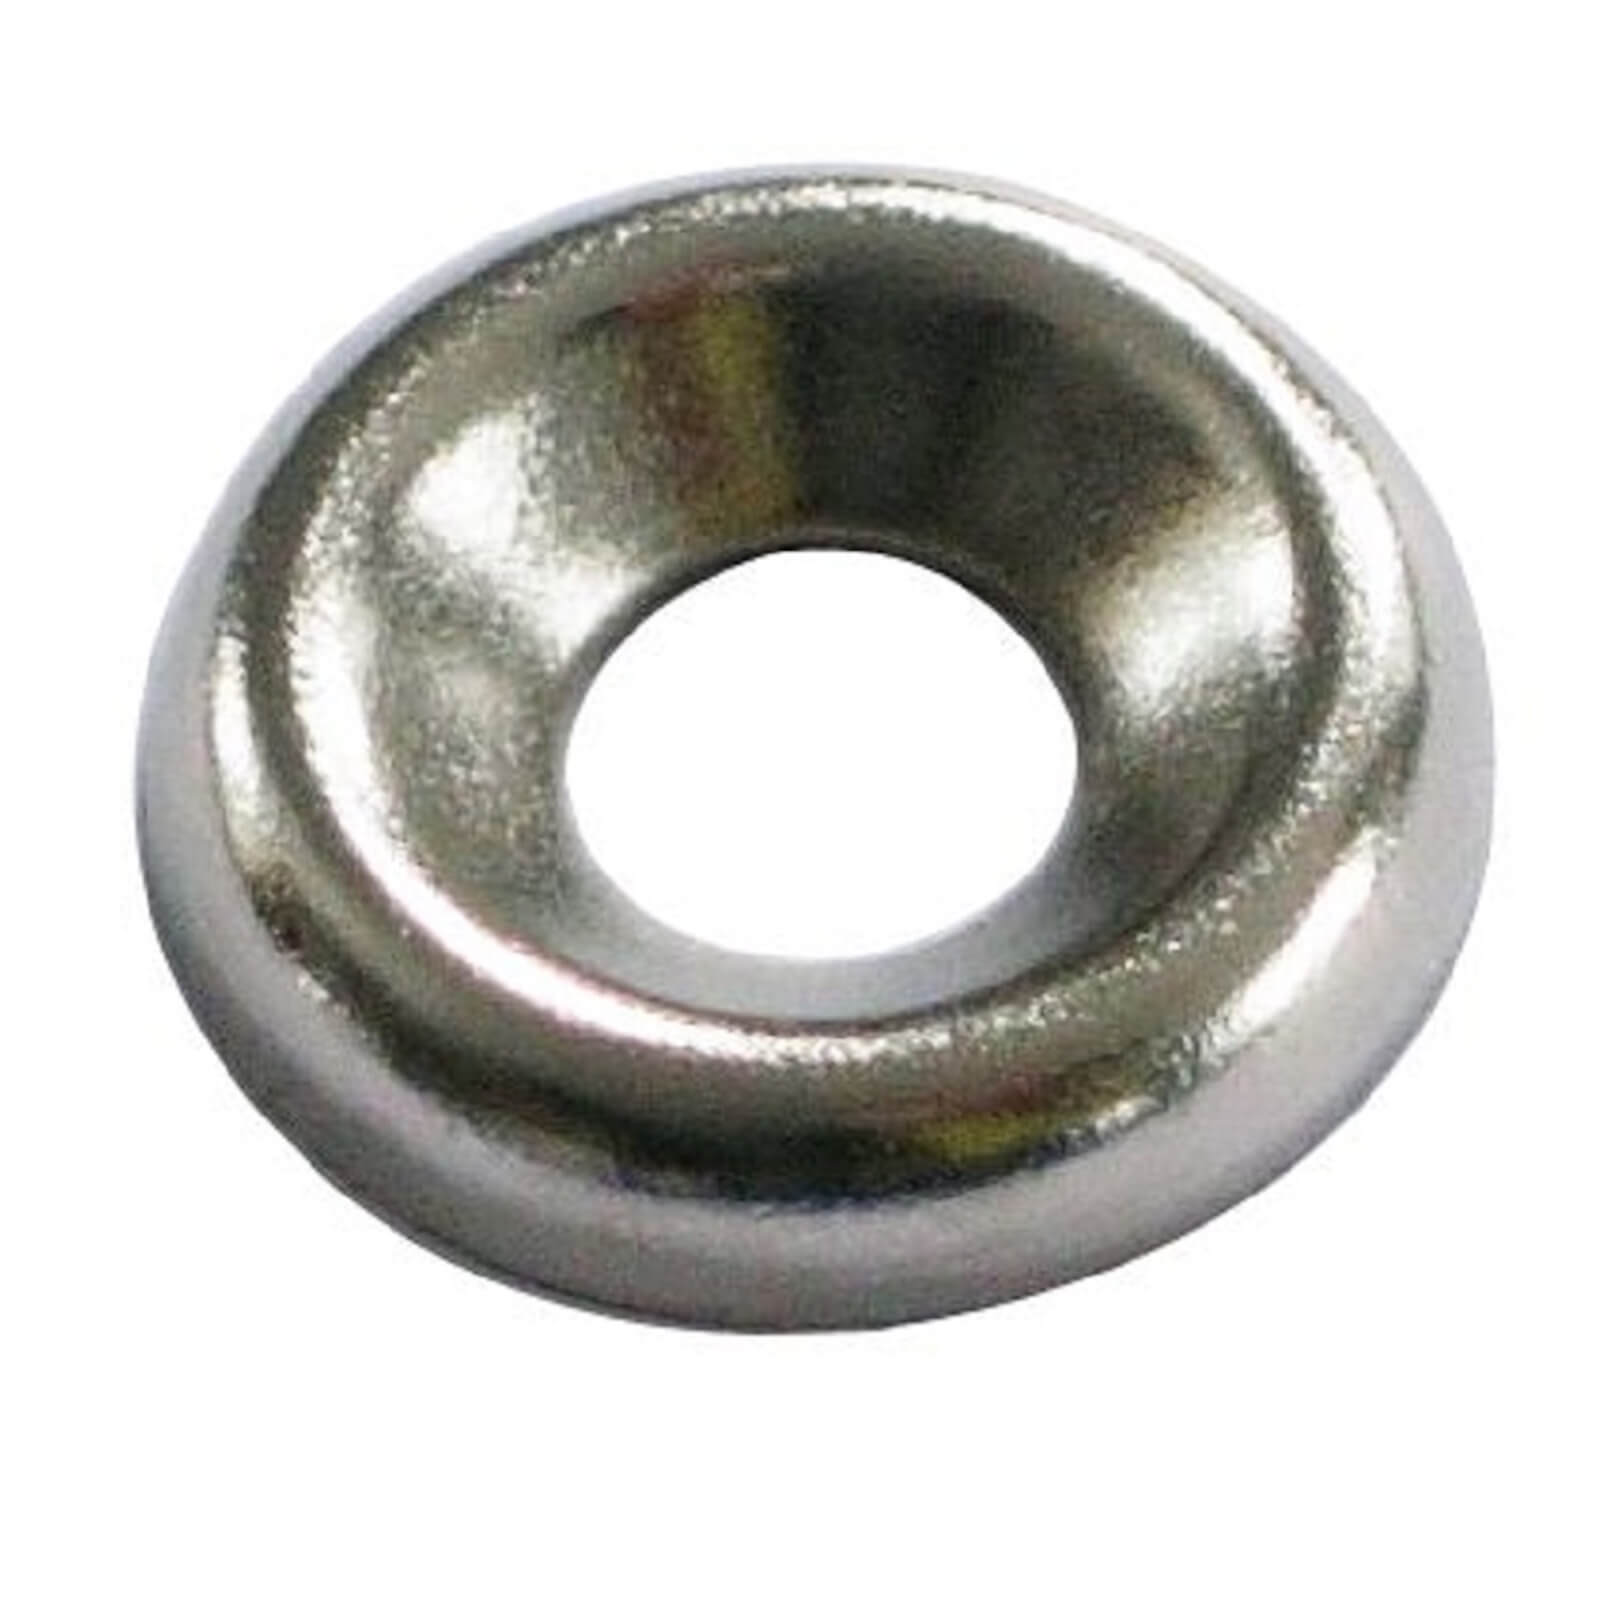 Screw Cup Washer - Nickel Plated - 4mm - 20 Pack